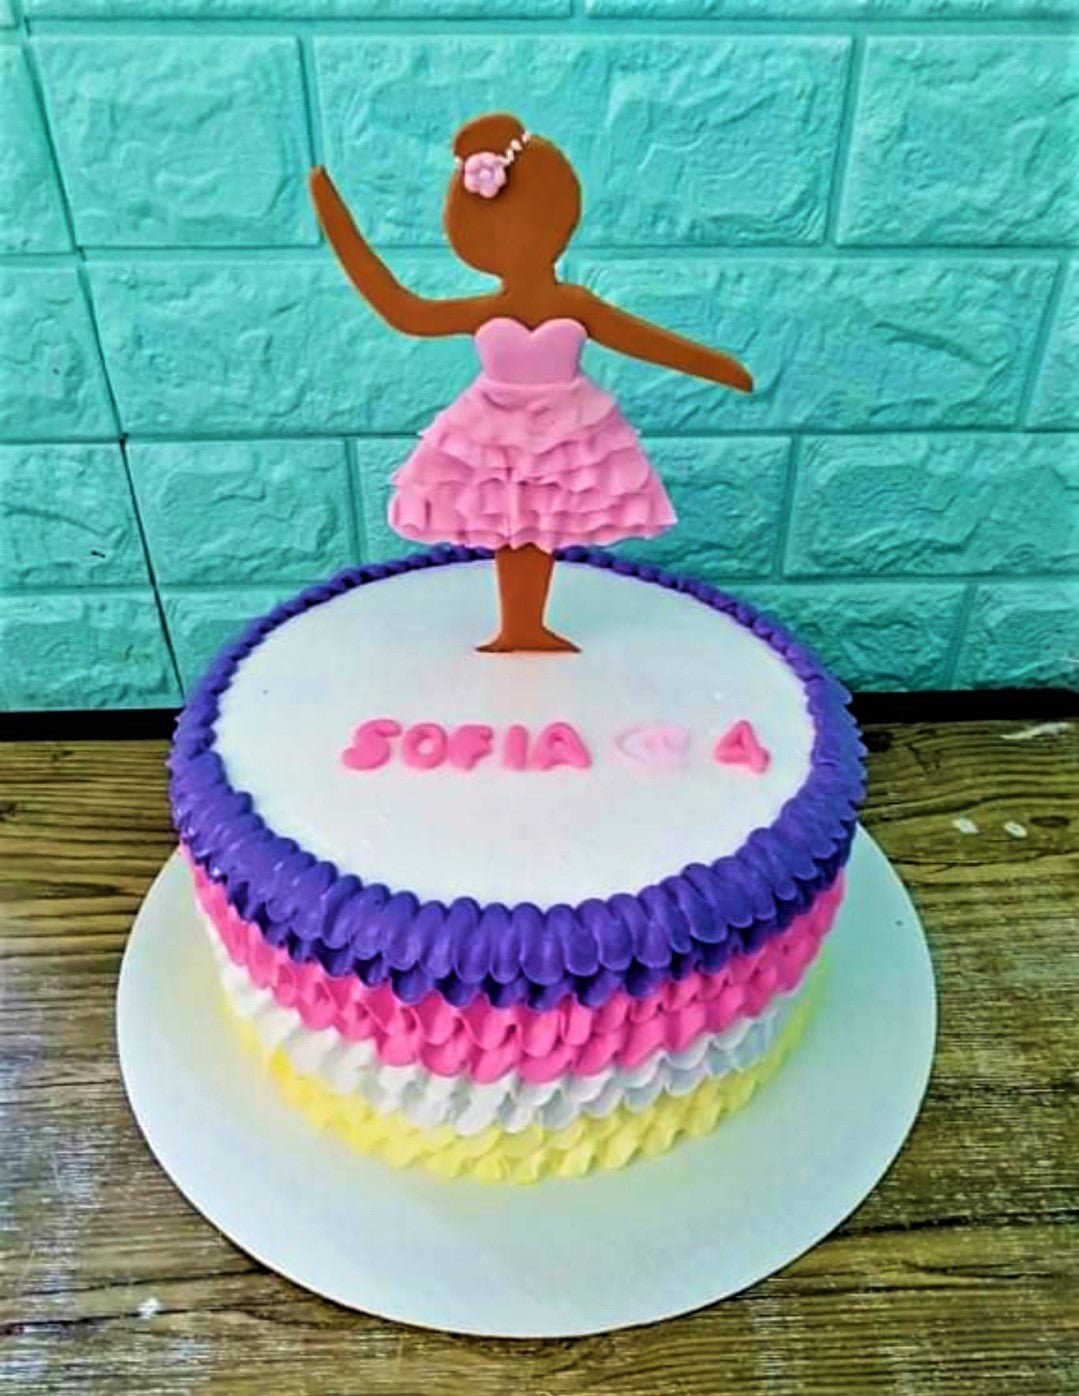 A Beautiful Buttercream Layer Cake Decorated With Ballerina Cake Topper The  Concept Of The Desserts For The Celebrating Stock Photo - Download Image  Now - iStock